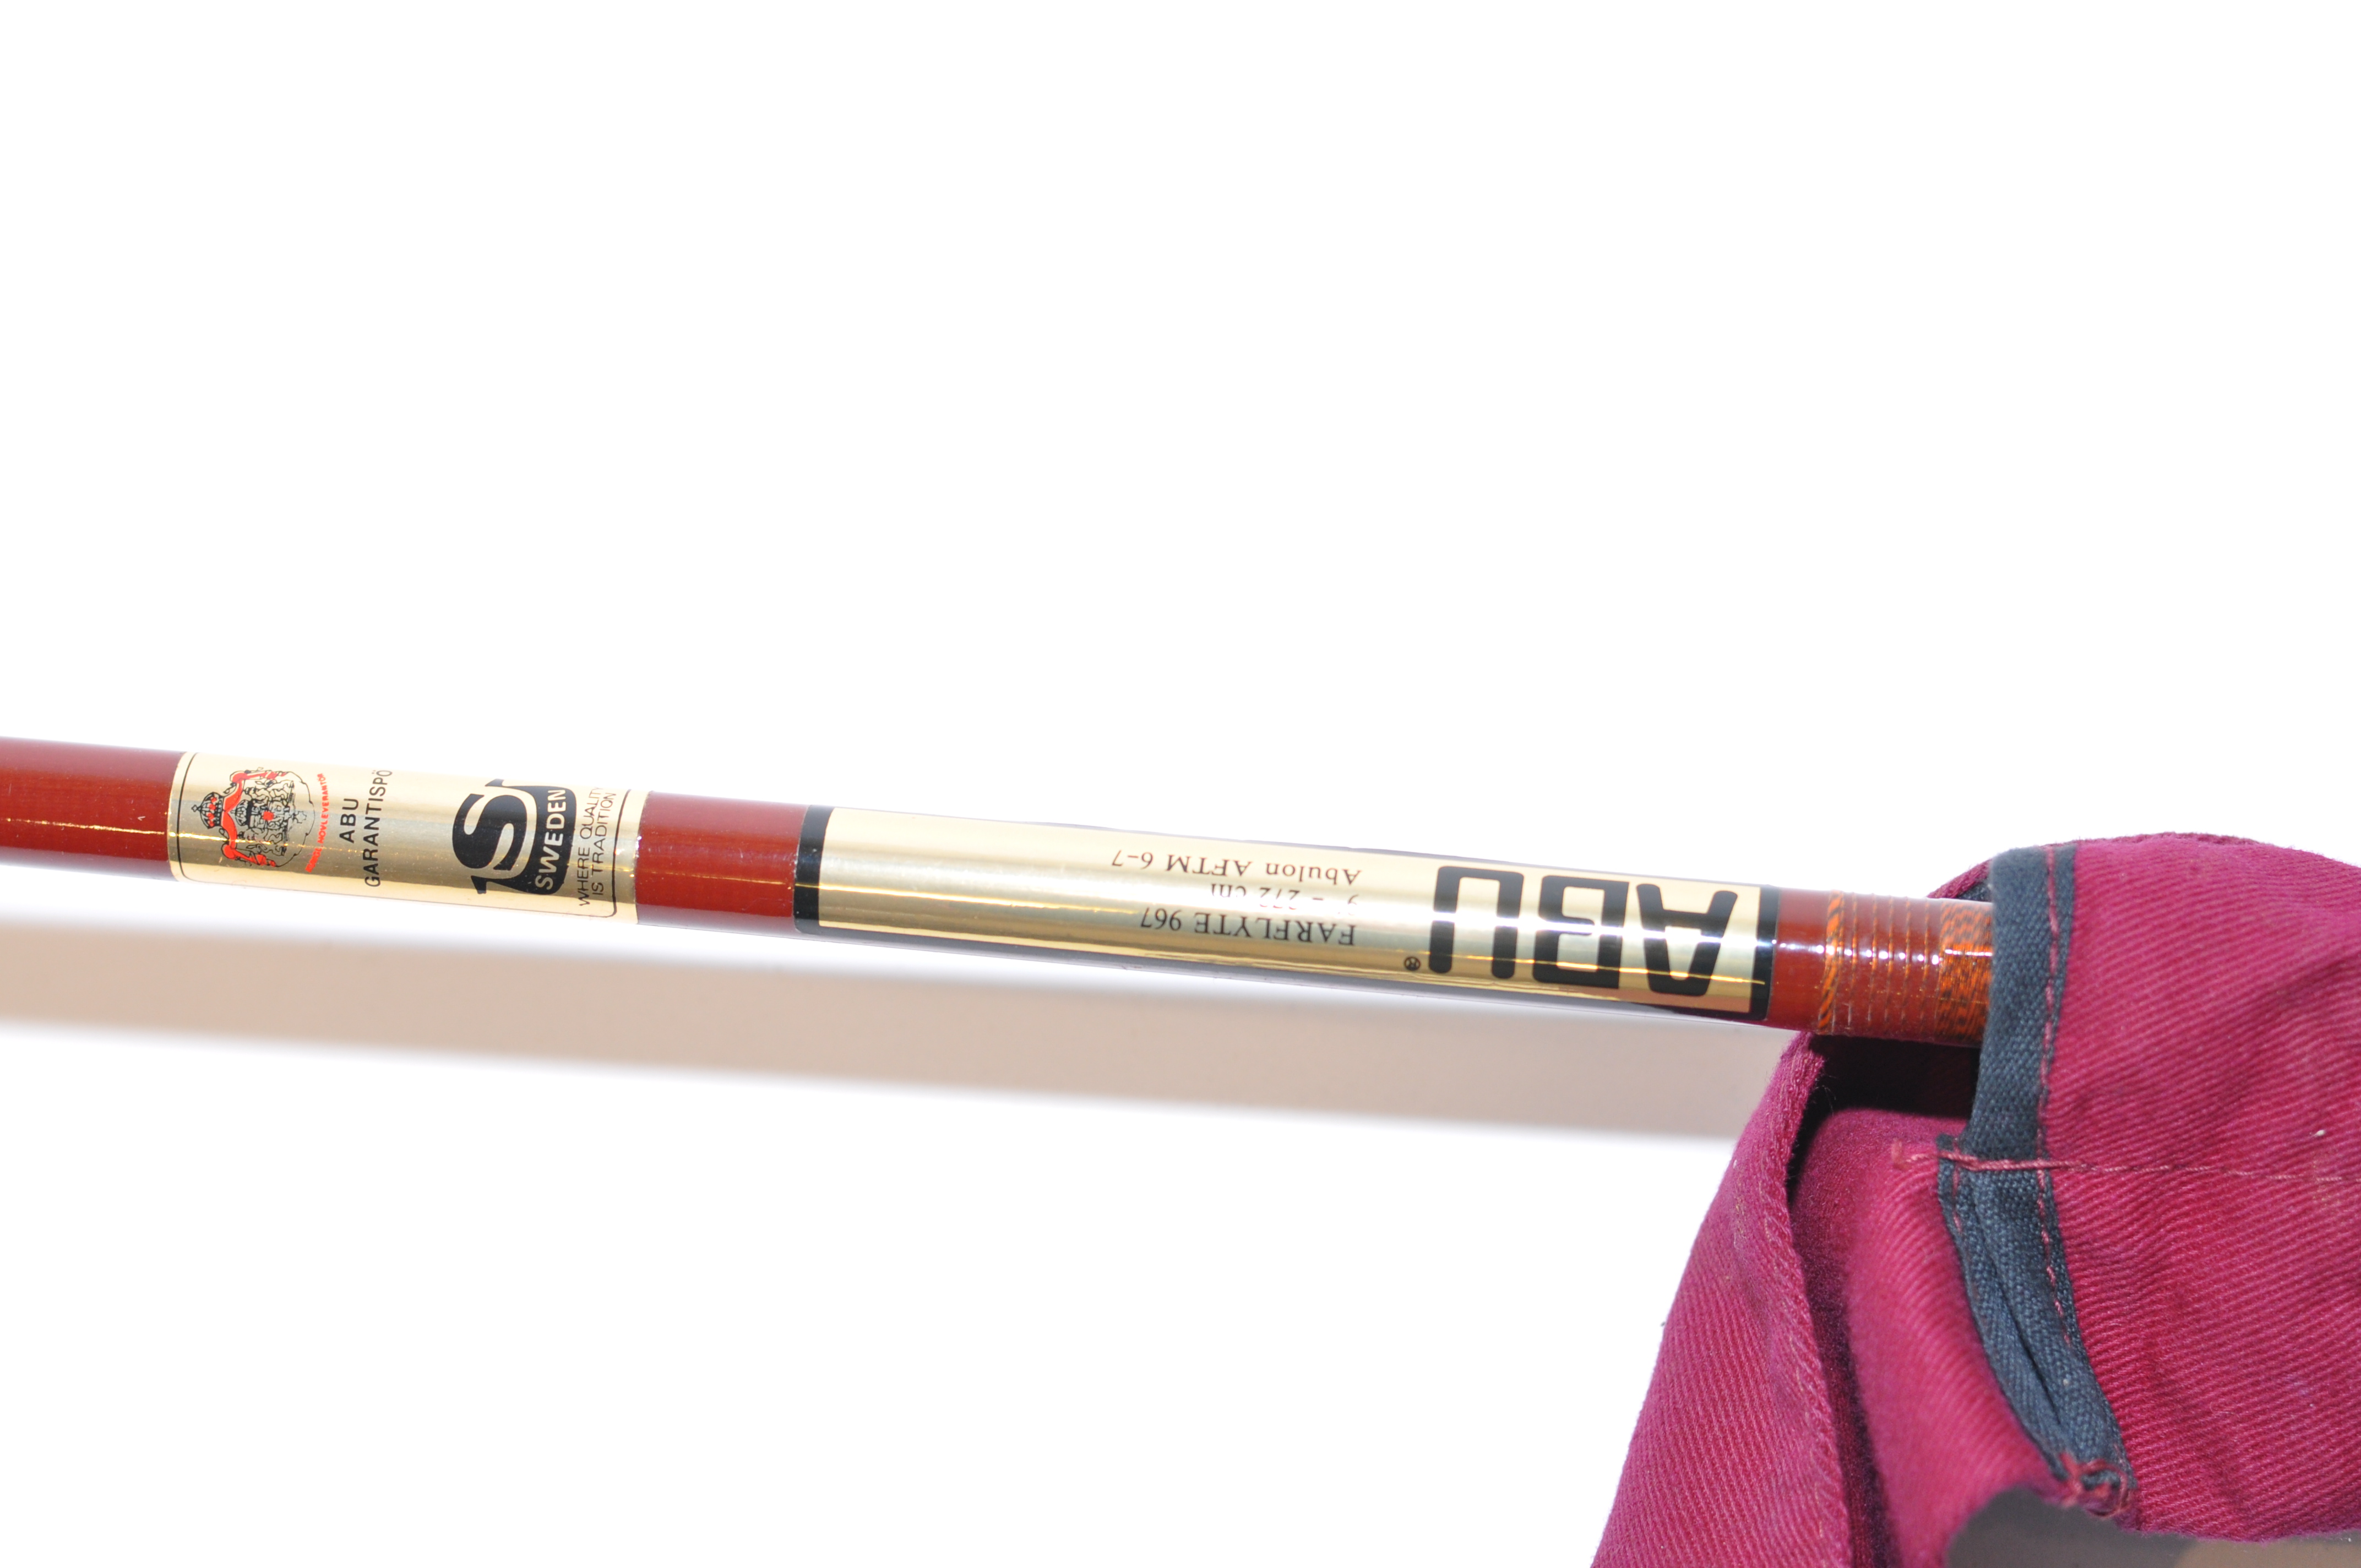 ABU FAR FLYTE 967 9' 6-7 WT TROUT FLY ROD, - Image 2 of 2